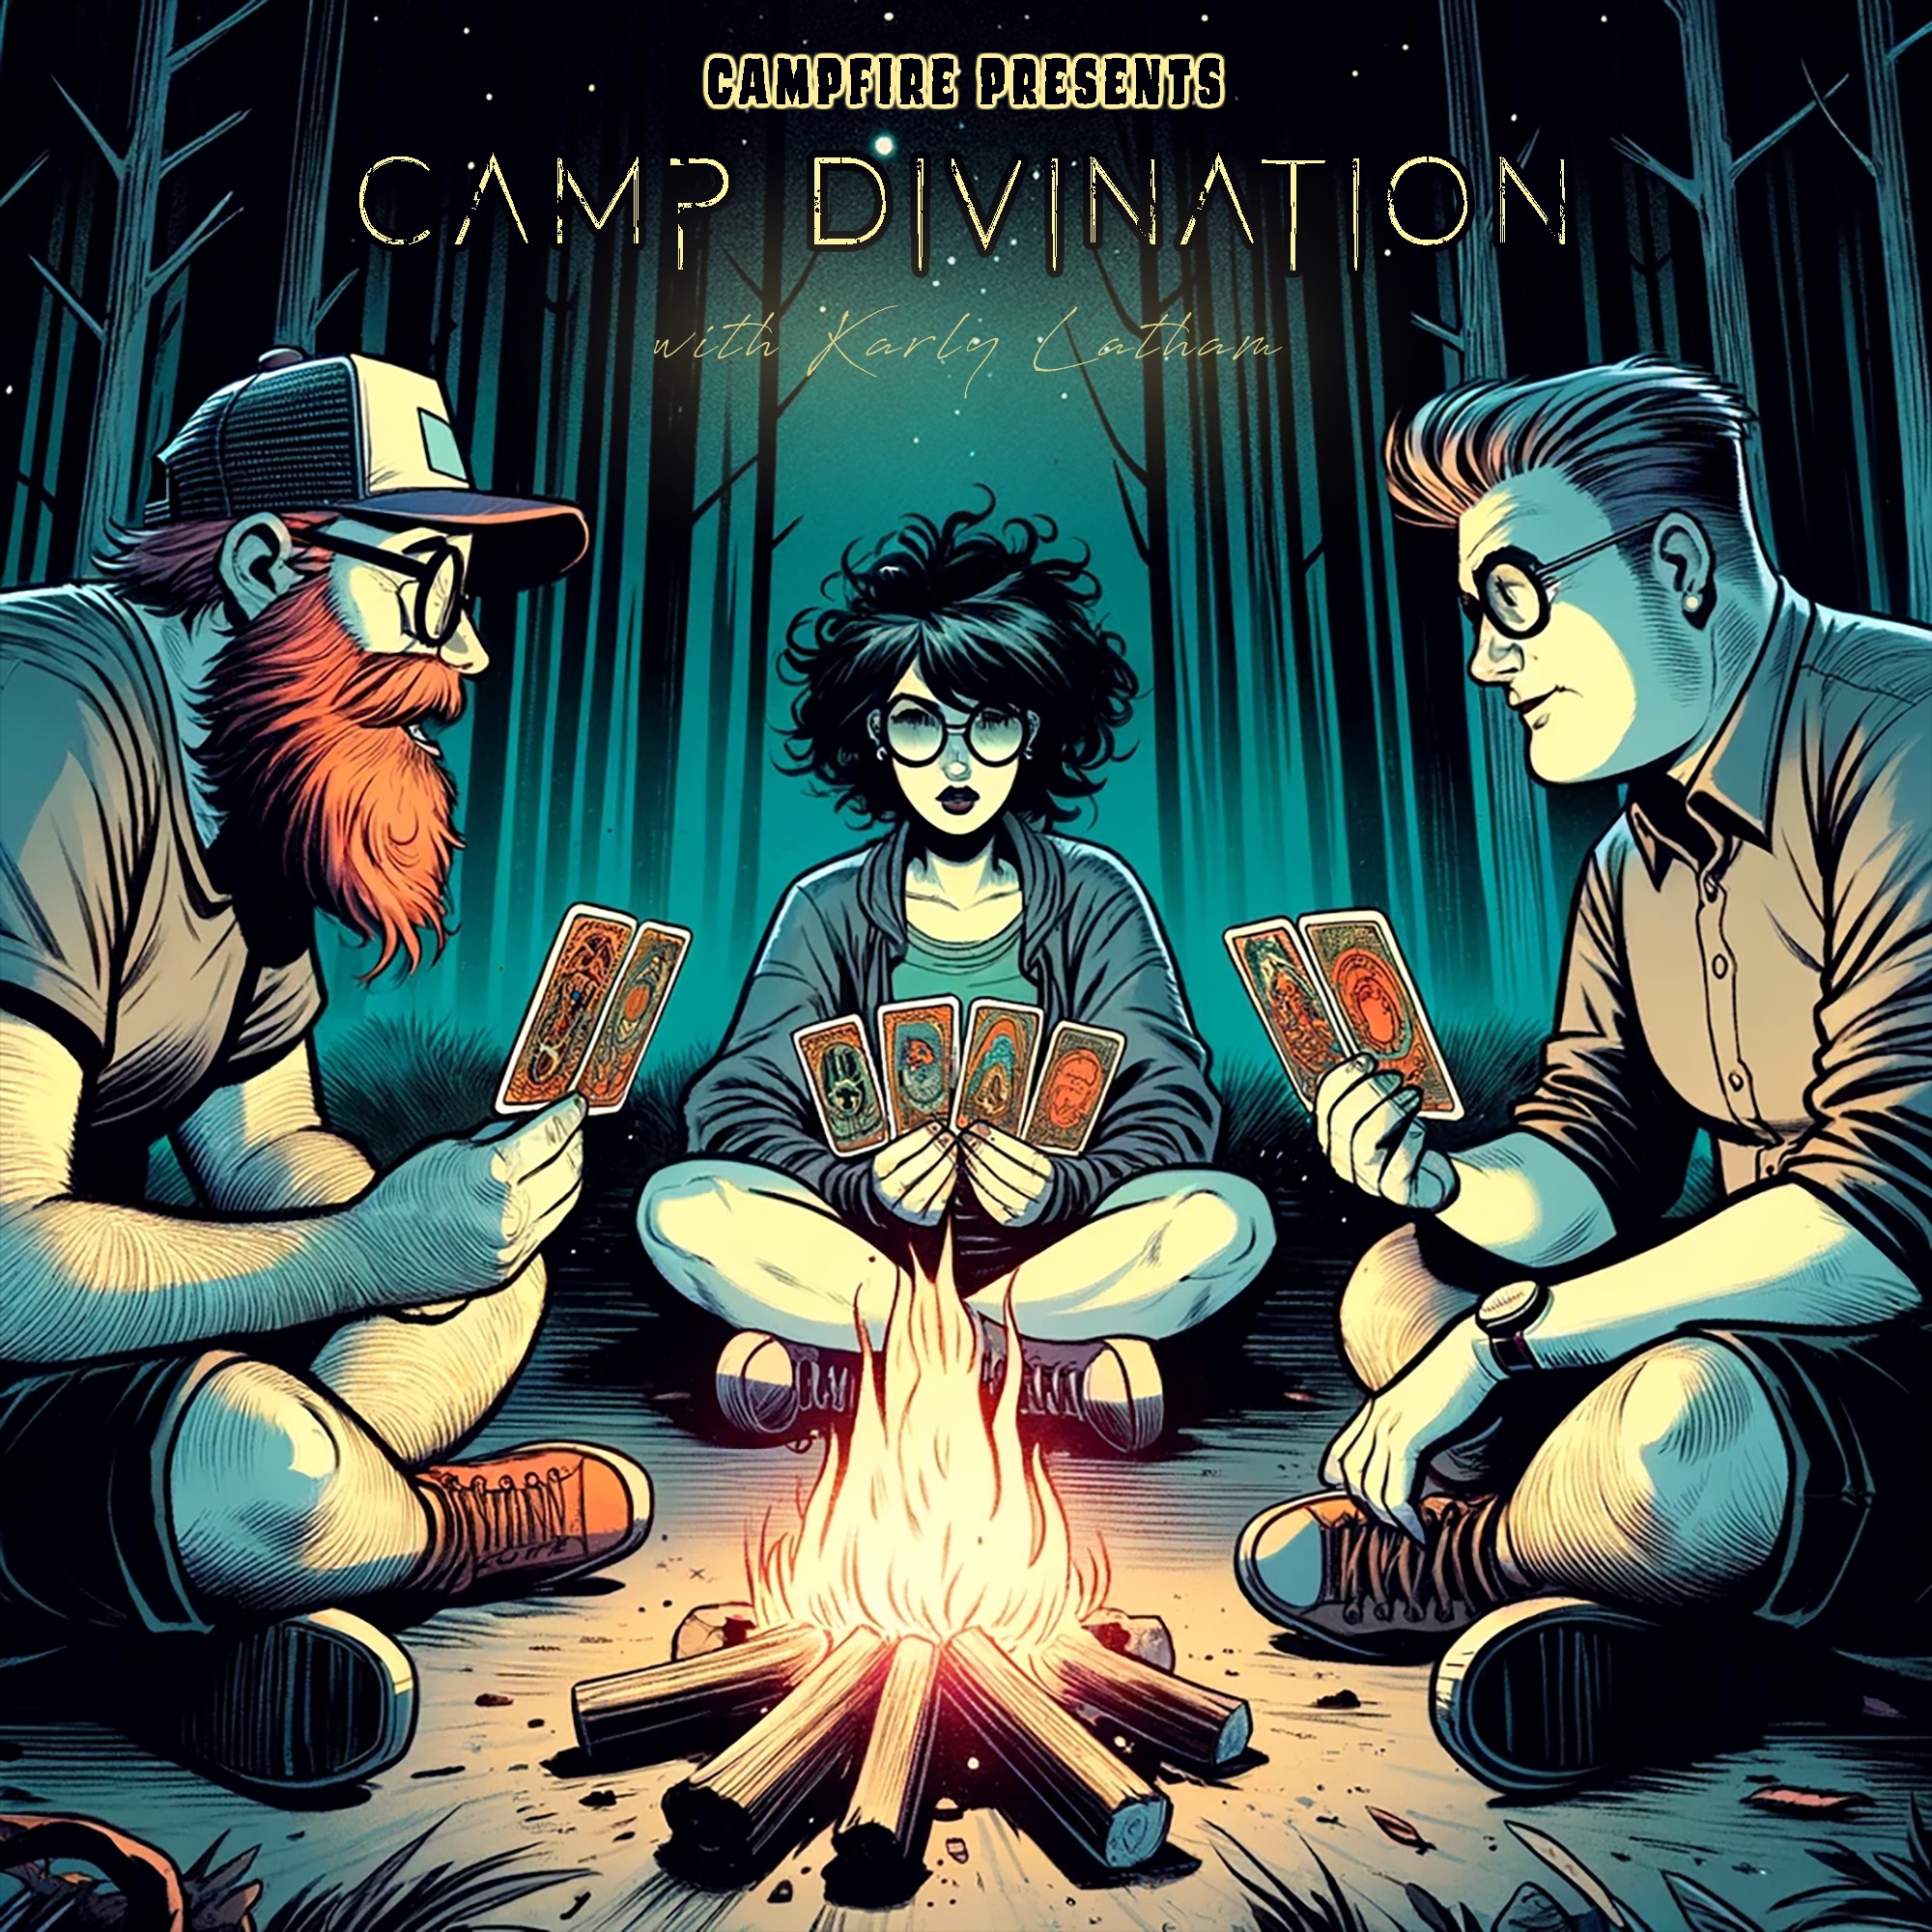 Camp Divination: The Poona Poltergeist